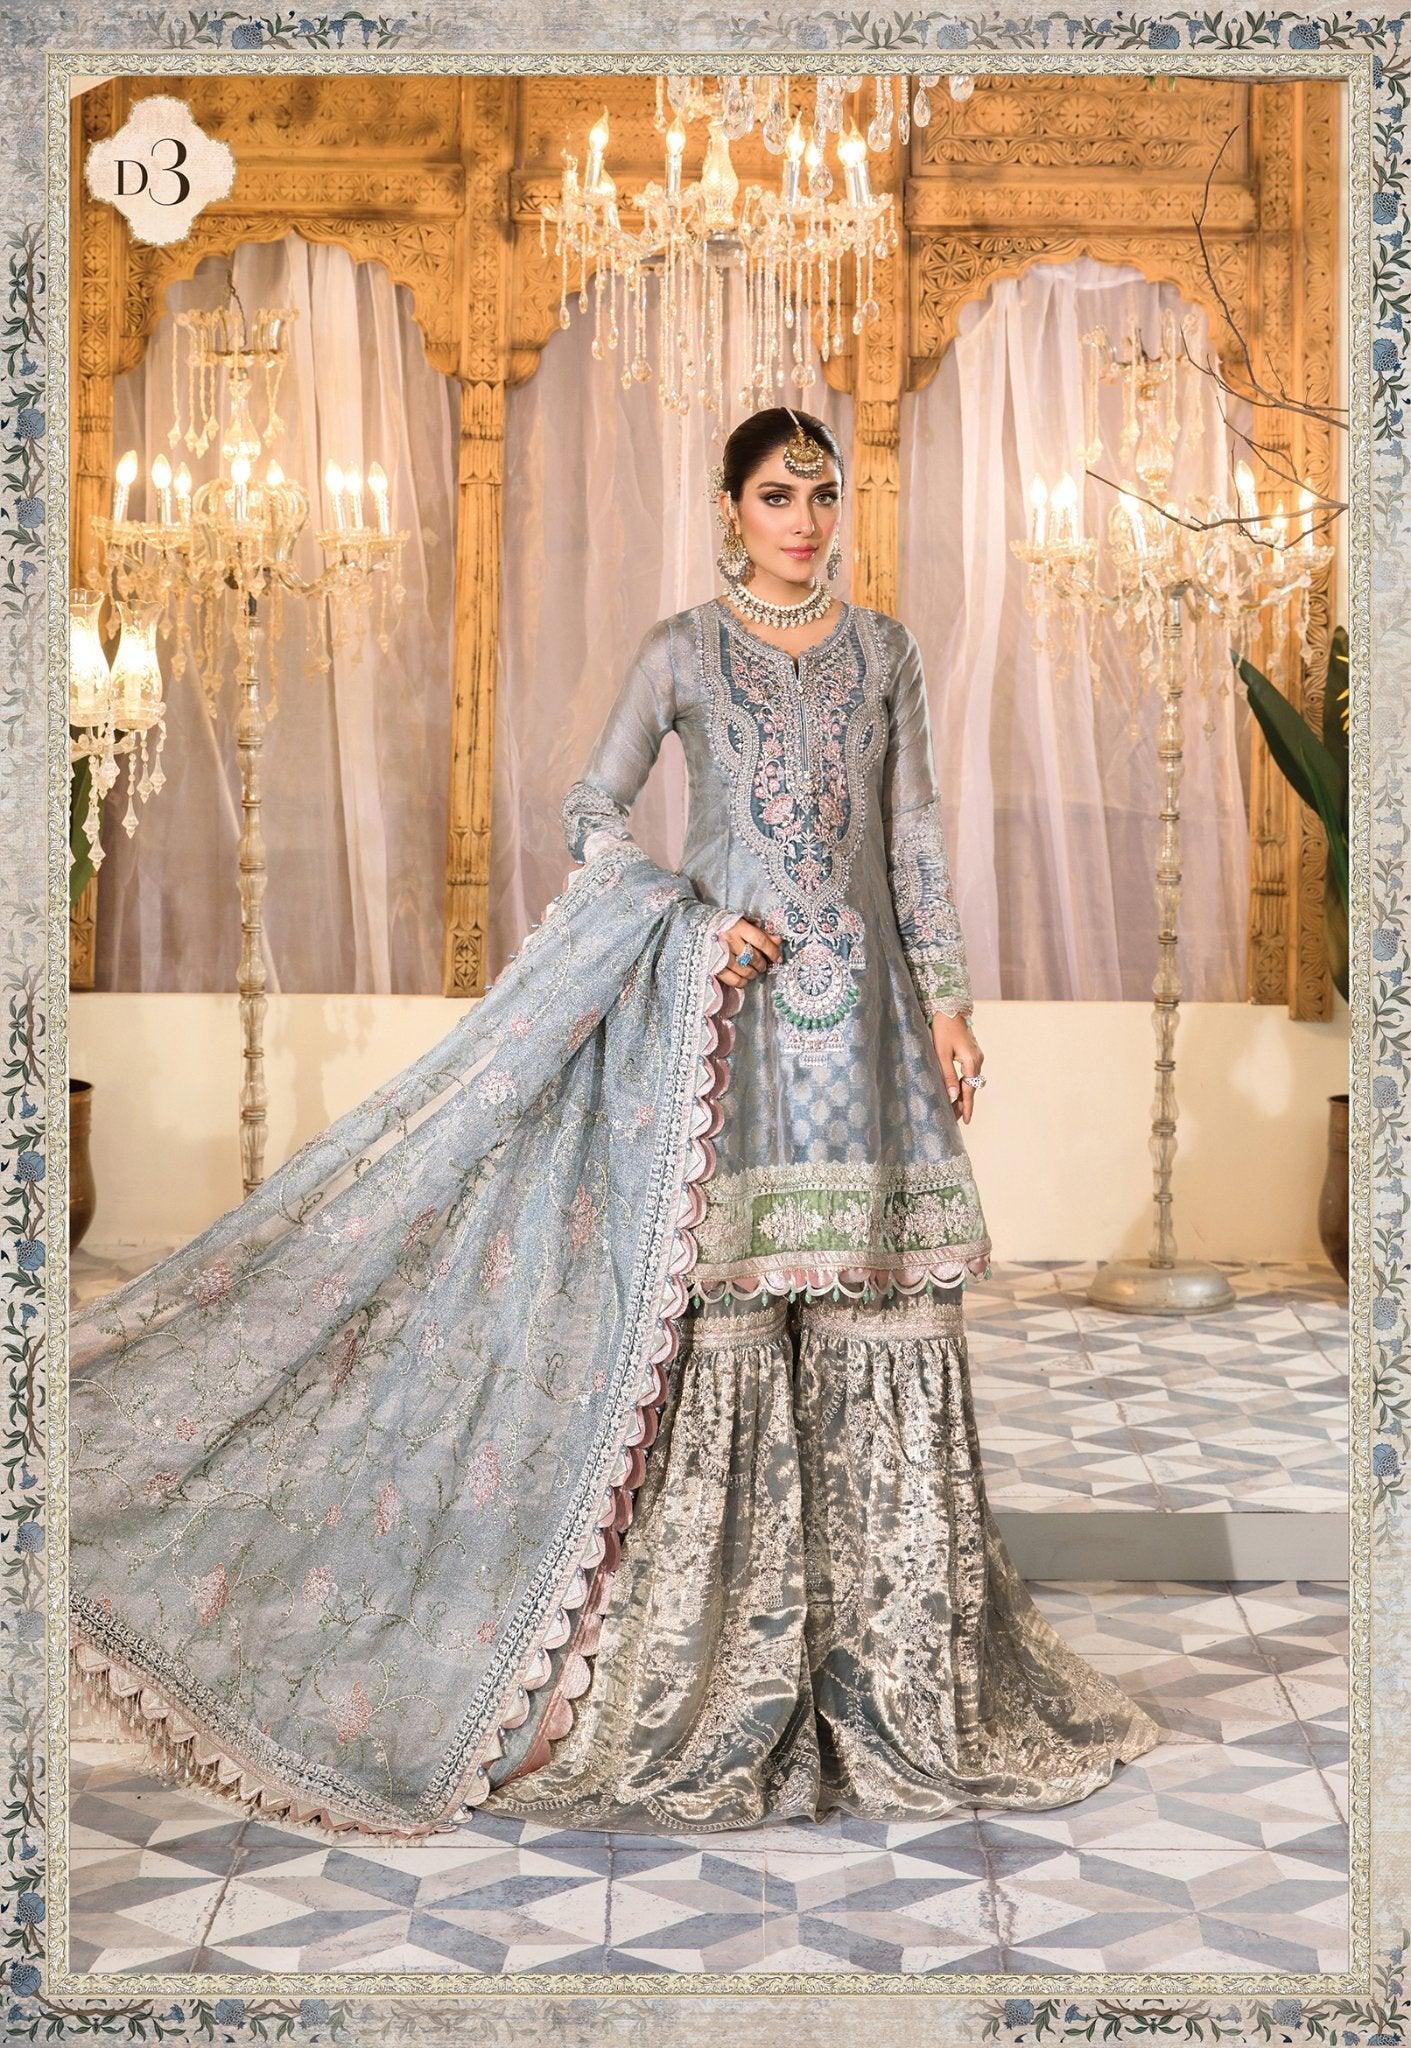 Maria.B - Mbroidered Hertiage Edition'22- Pearl Blue and Ash Pink D#03 - Maria.B - Mbroidered Hertiage Edition'22- Pearl Blue and Ash Pink D#03 - Shahana Collection